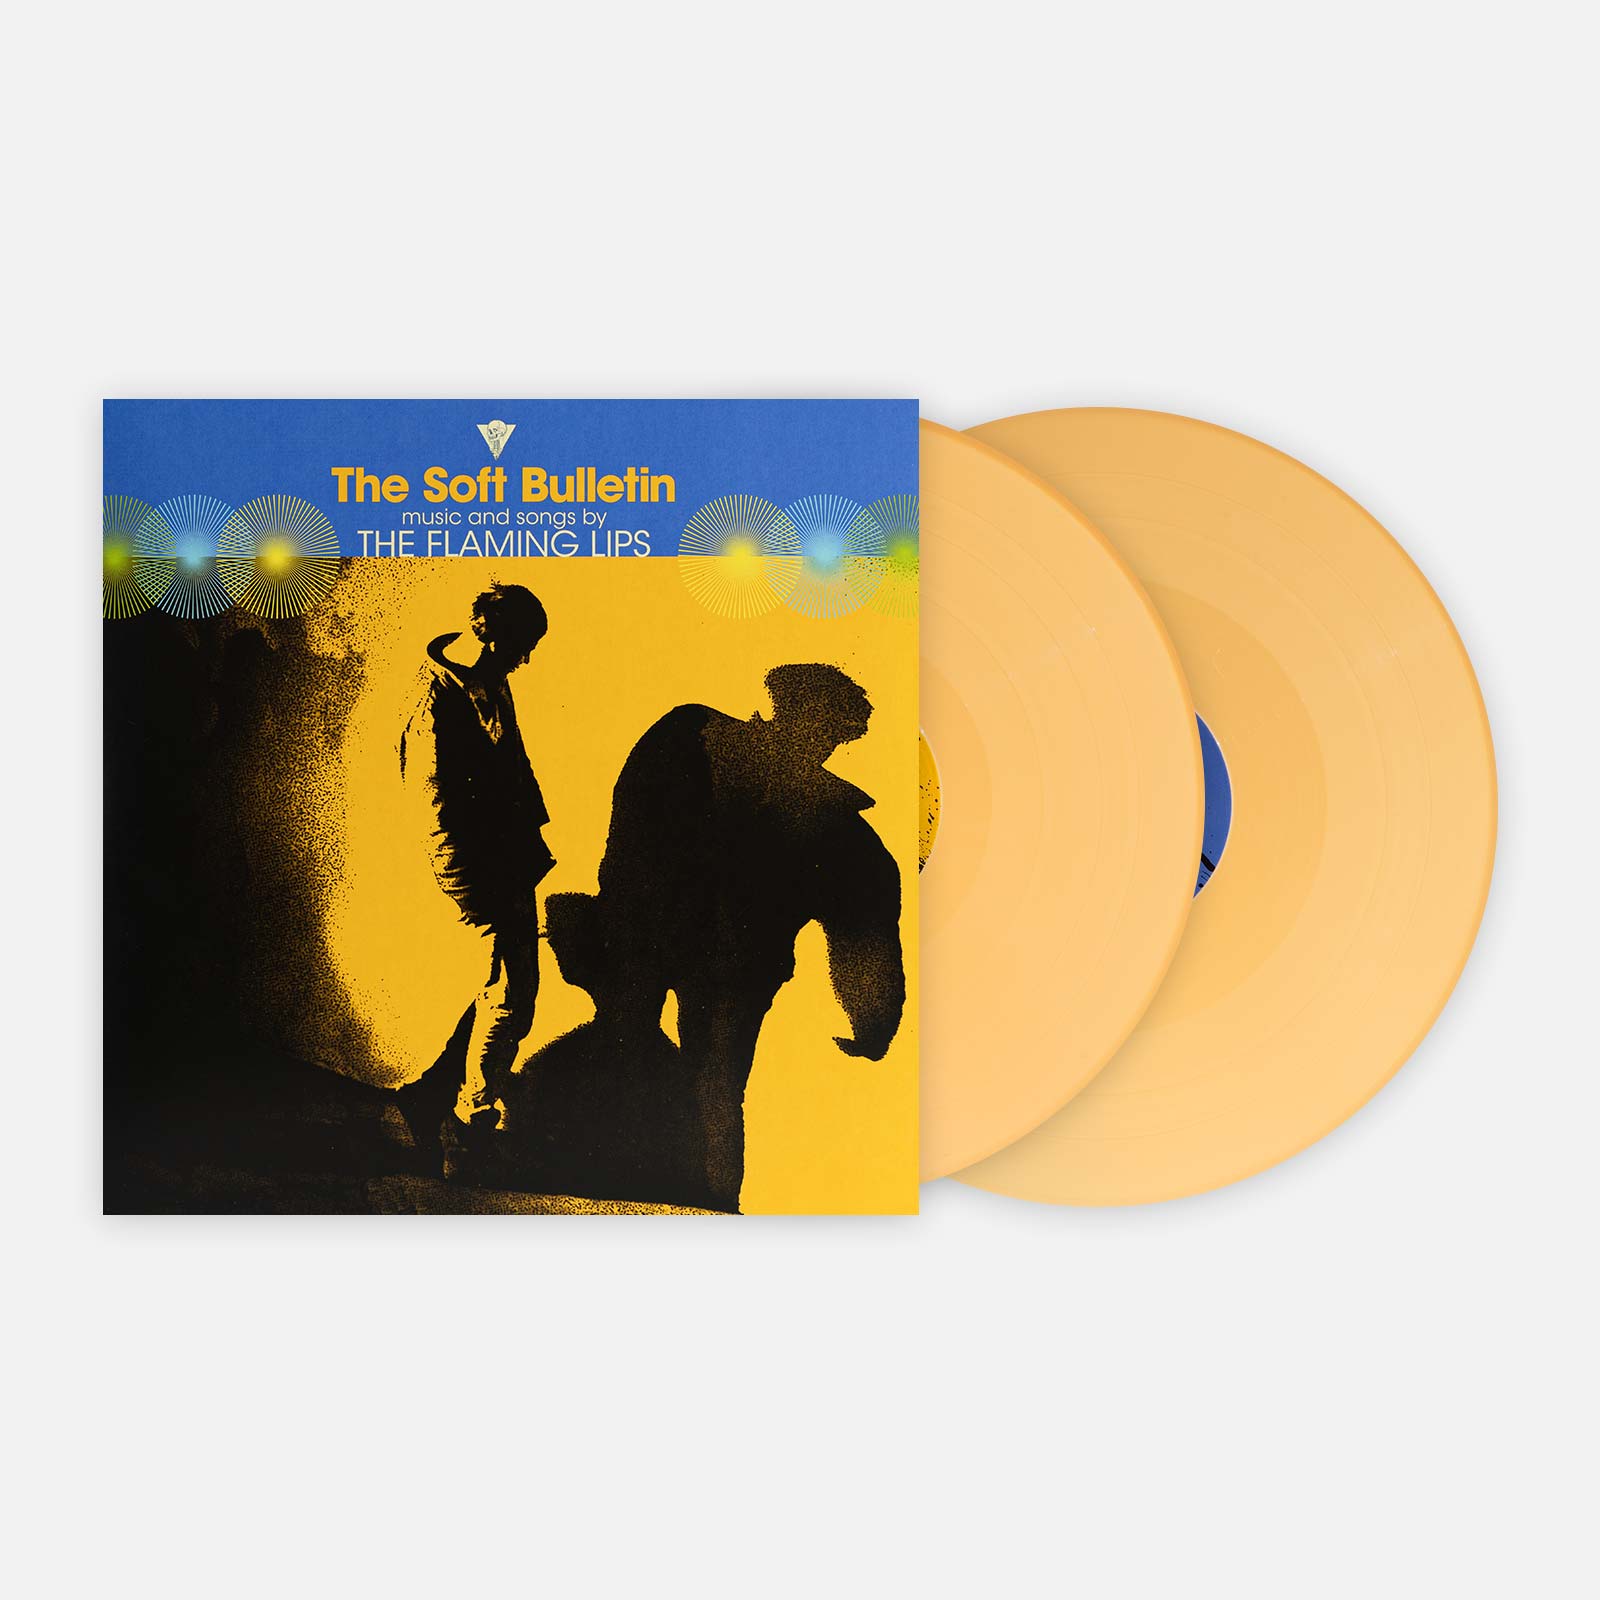 The Flaming Lips 'The Soft Bulletin' - Vinyl Me, Please